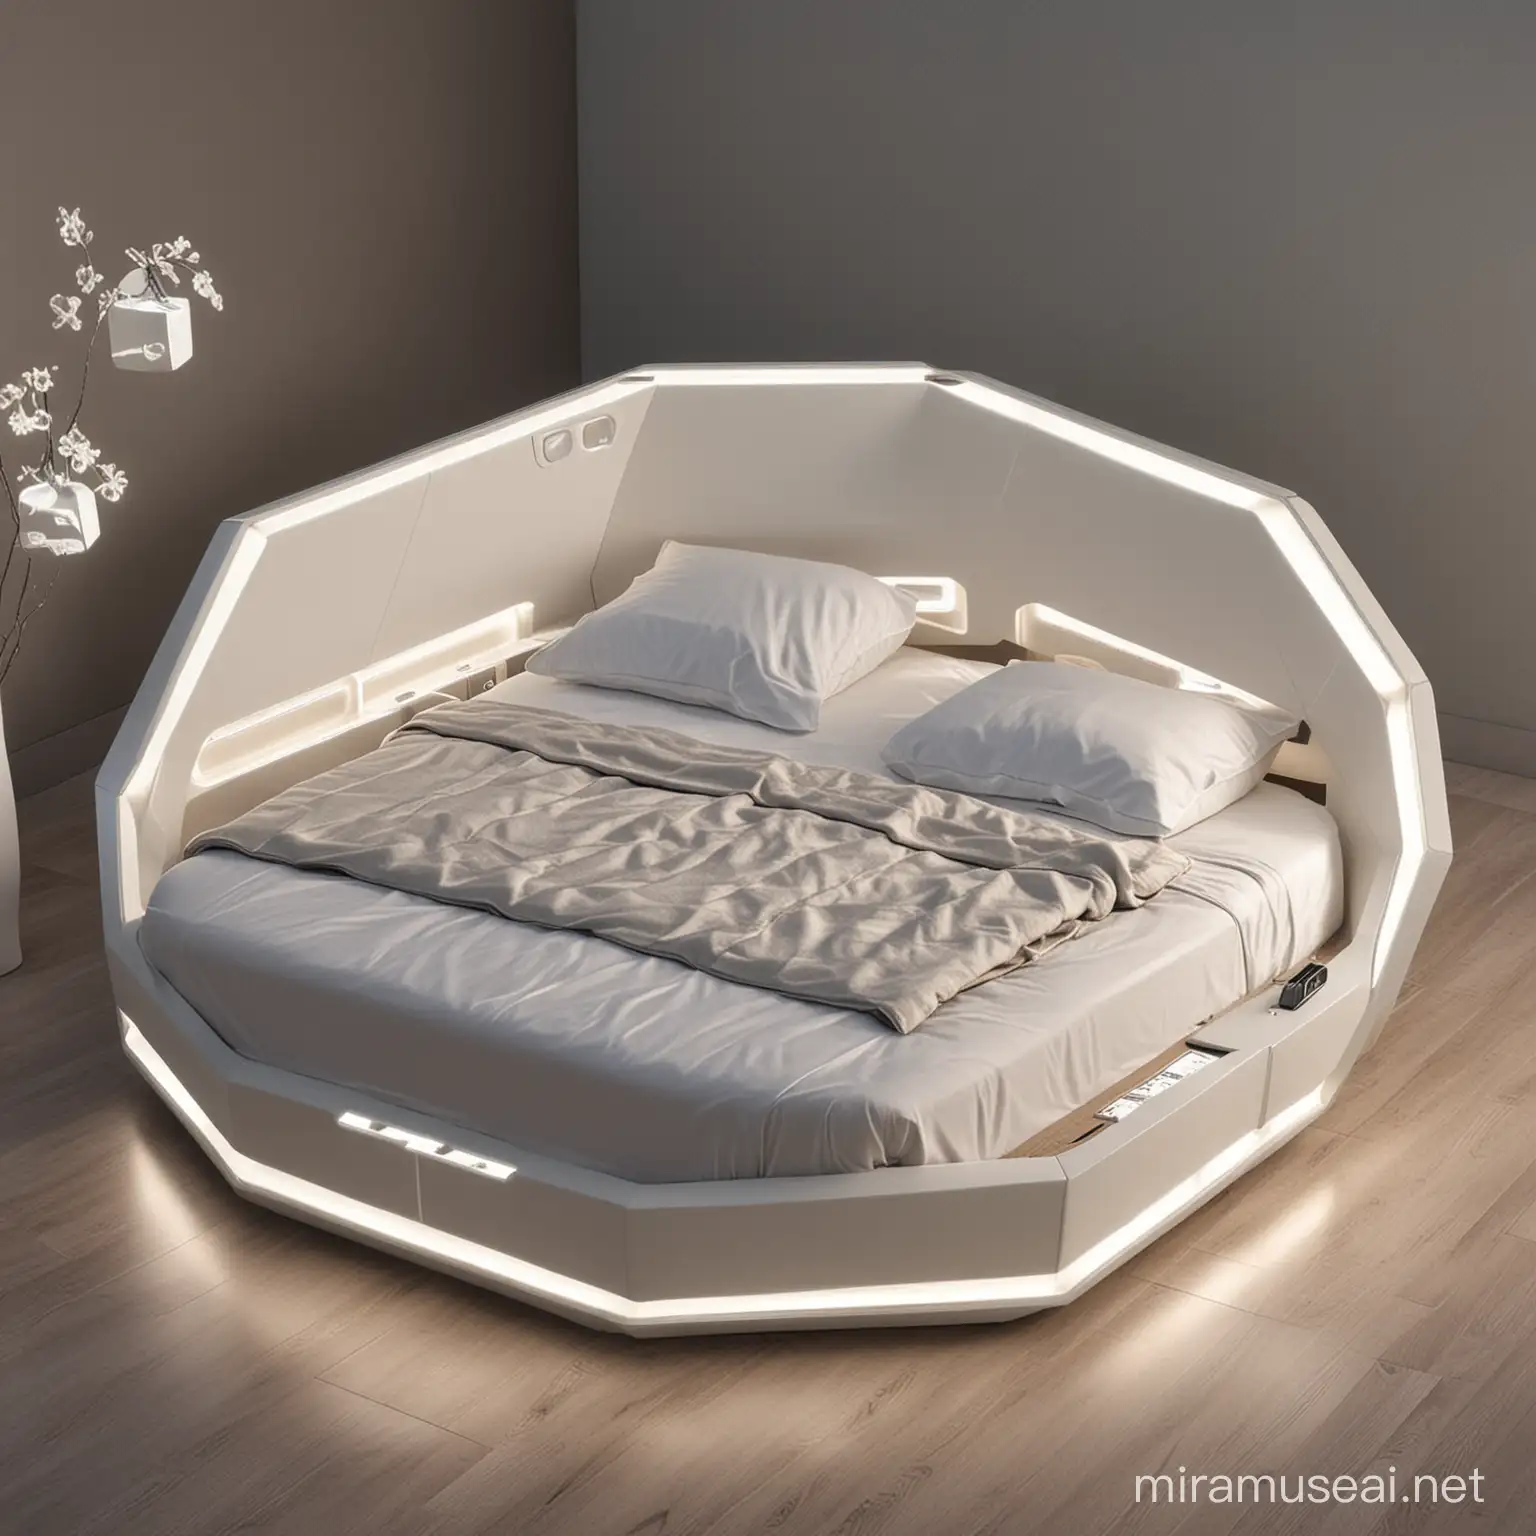 Modern Technology Bed with Massage Features in Pentagon Shape